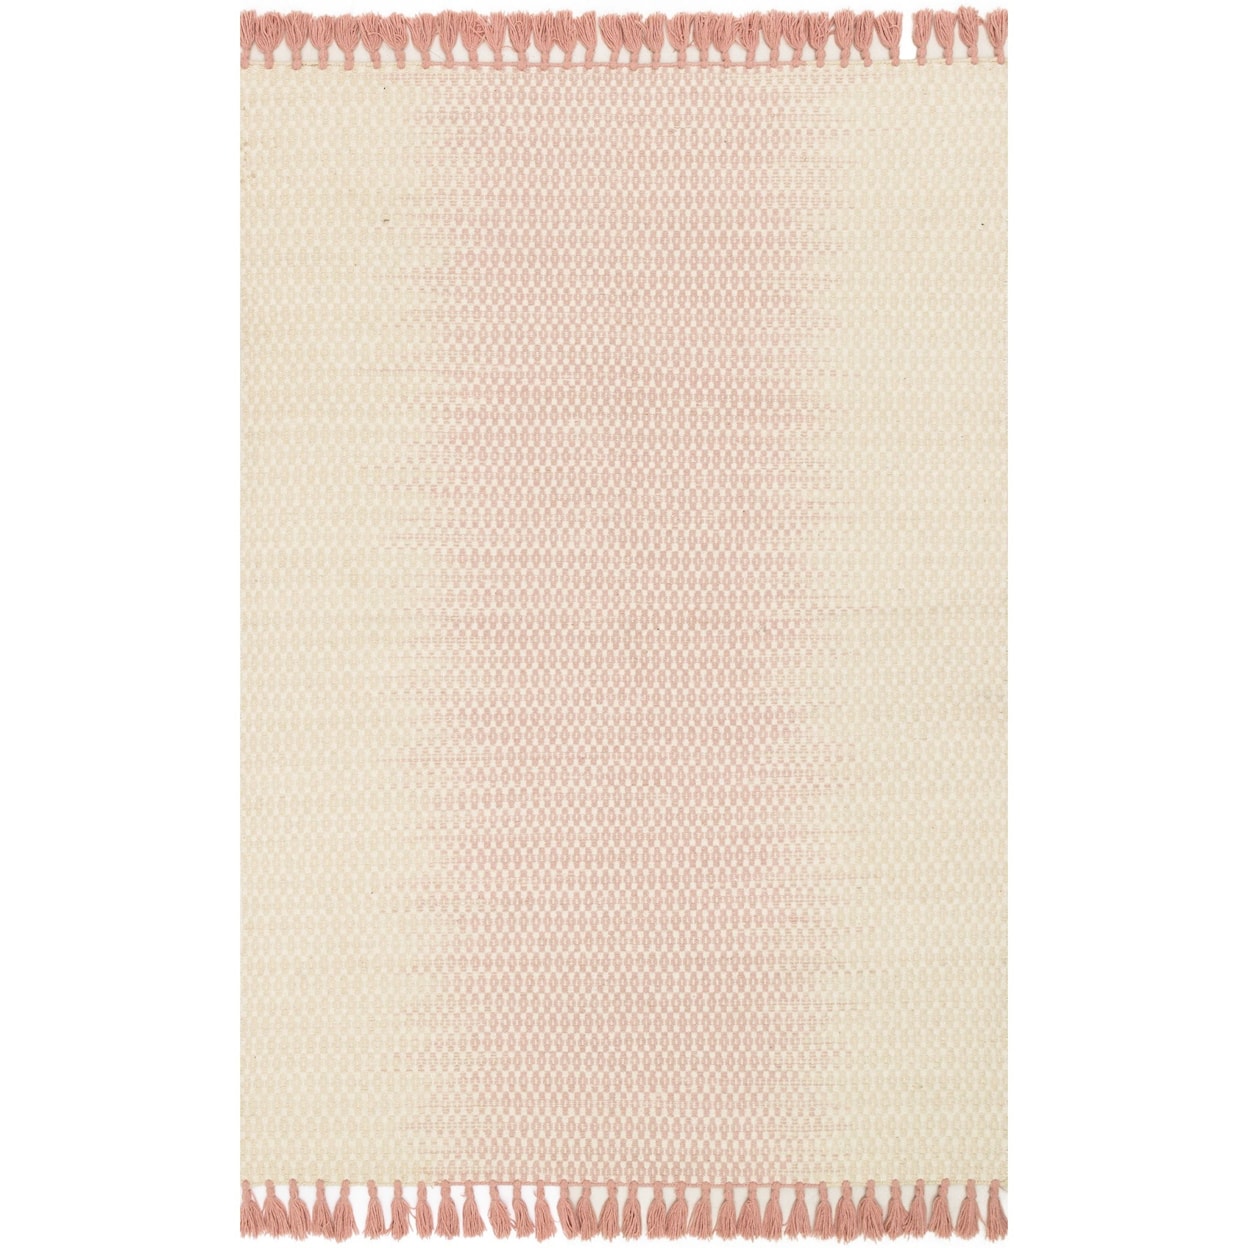 Magnolia Home by Joanna Gaines for Loloi Chantilly 7' 9" x 9' 9" Rectangle Rug